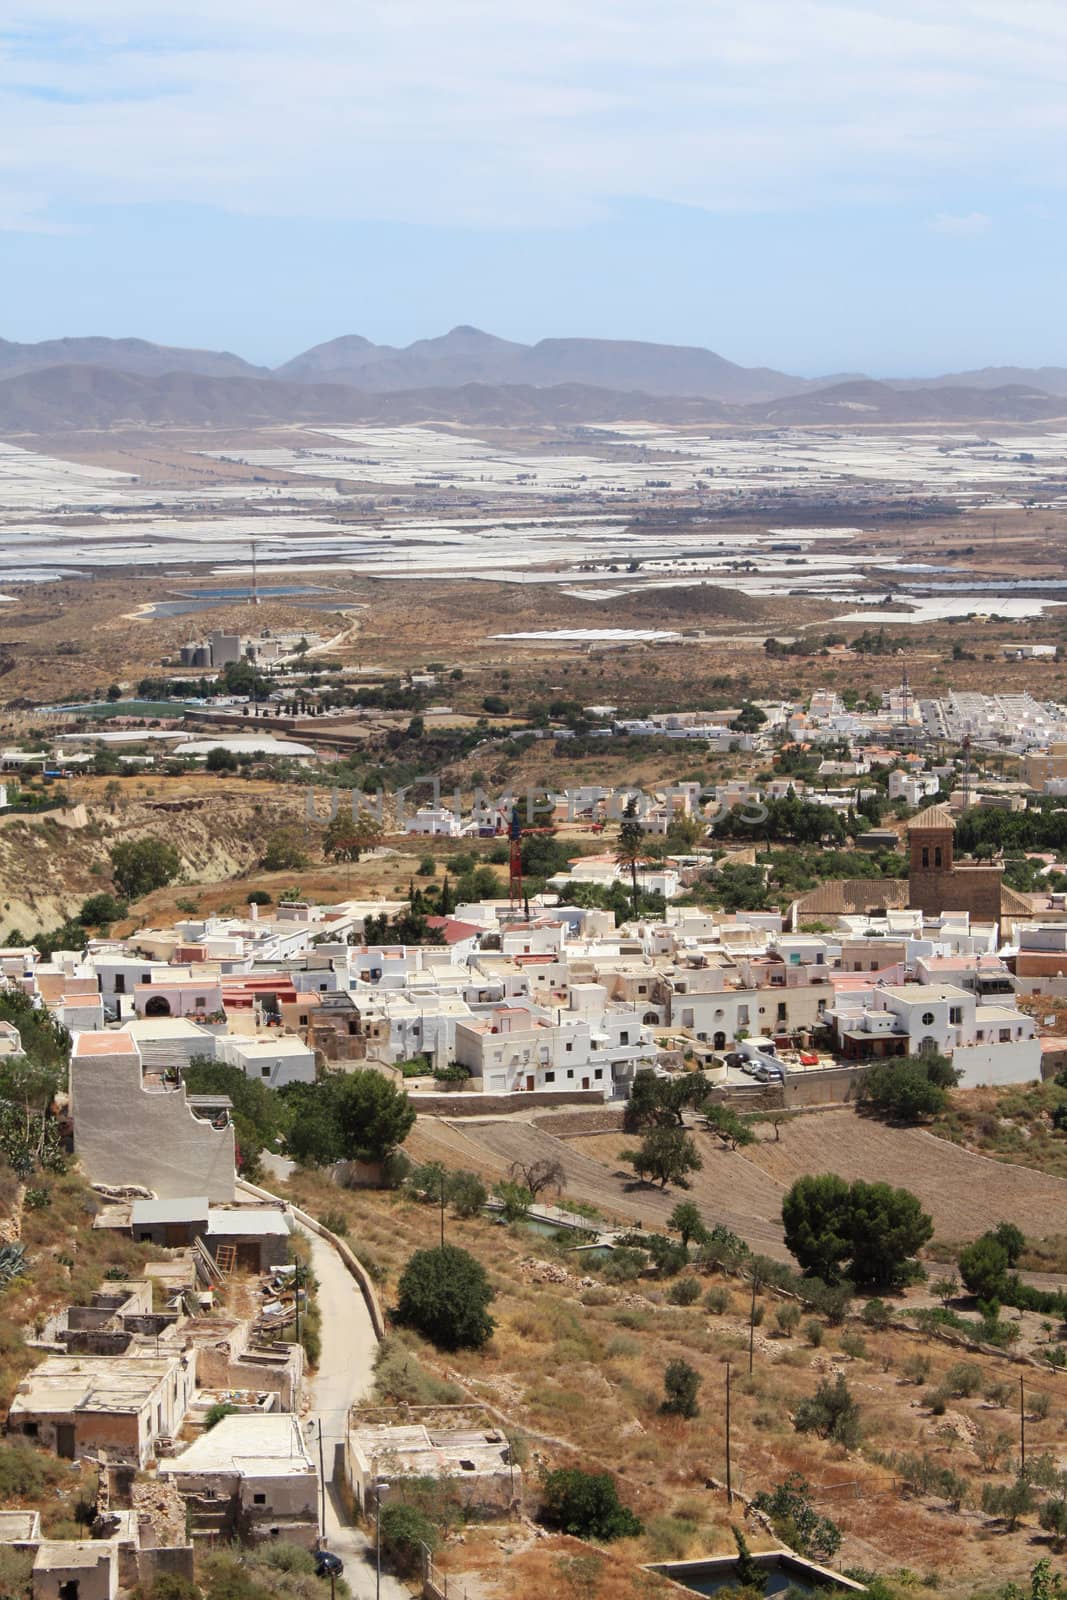 Bird's eye view of Nijar, a typical whitewashed Andalusian village in the province of Almeria, Spain, with greenhouses in the background.